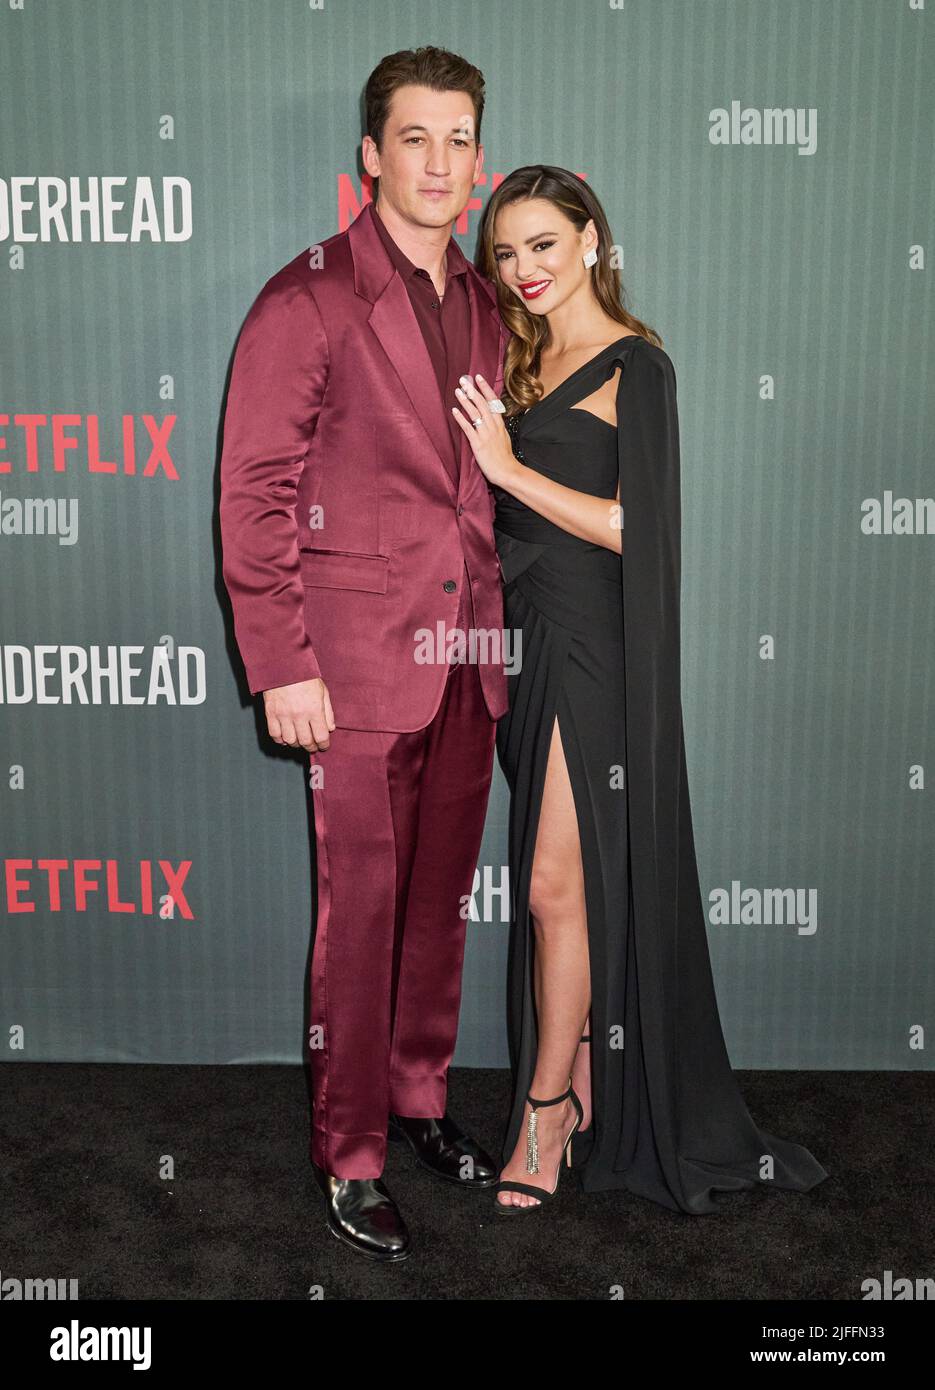 NEW YORK, NY, USA - JUNE 15, 2022: Miles Teller and Keleigh Sperry attend the New York Premiere of Netflix's 'Spiderhead' at the Paris Theater. Stock Photo